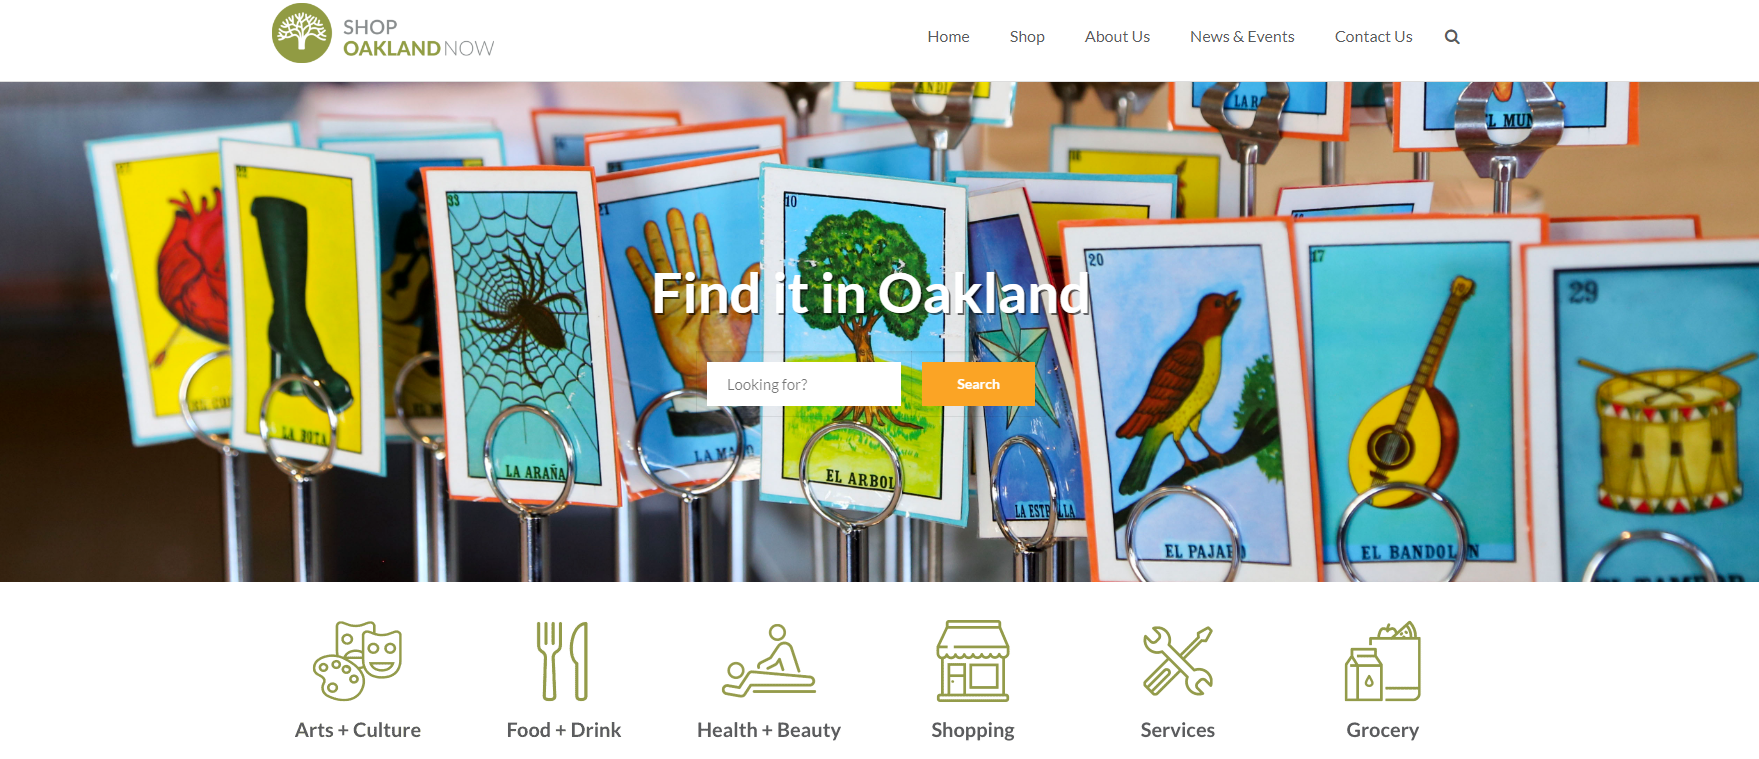 Introducing Shop Oakland Now - Main Street Launch.org